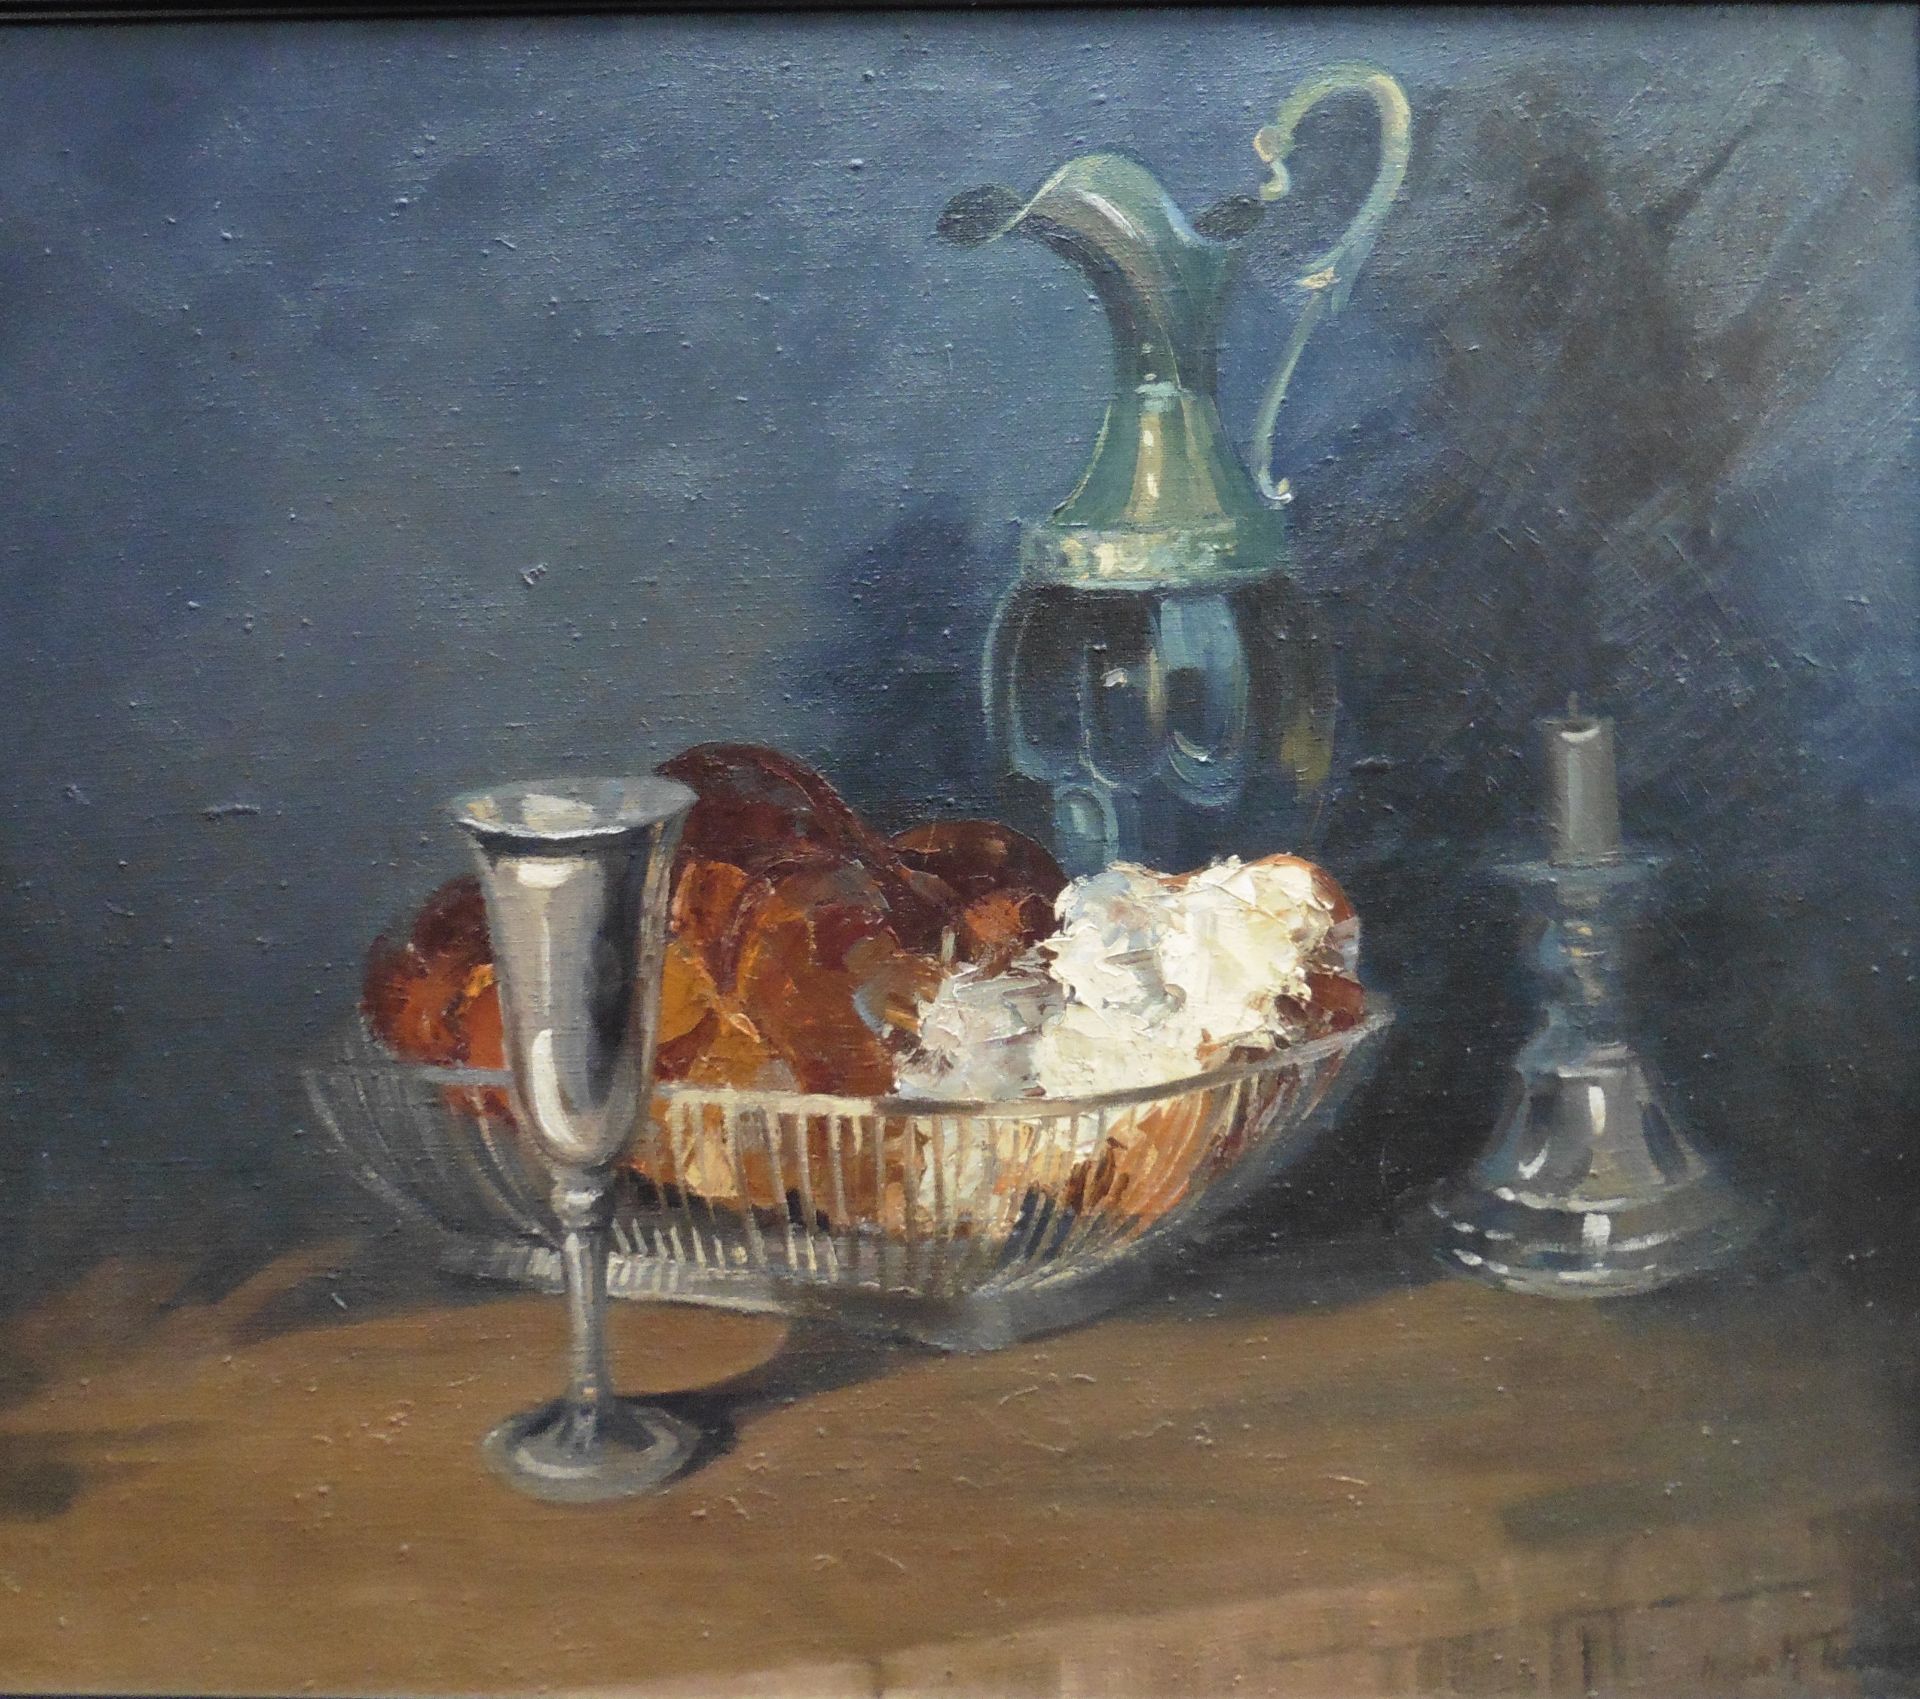 Bread and Pewter still life oil painting by Helen M Turner Bn 1937 PPAI, GSWA Exhib R.G.I